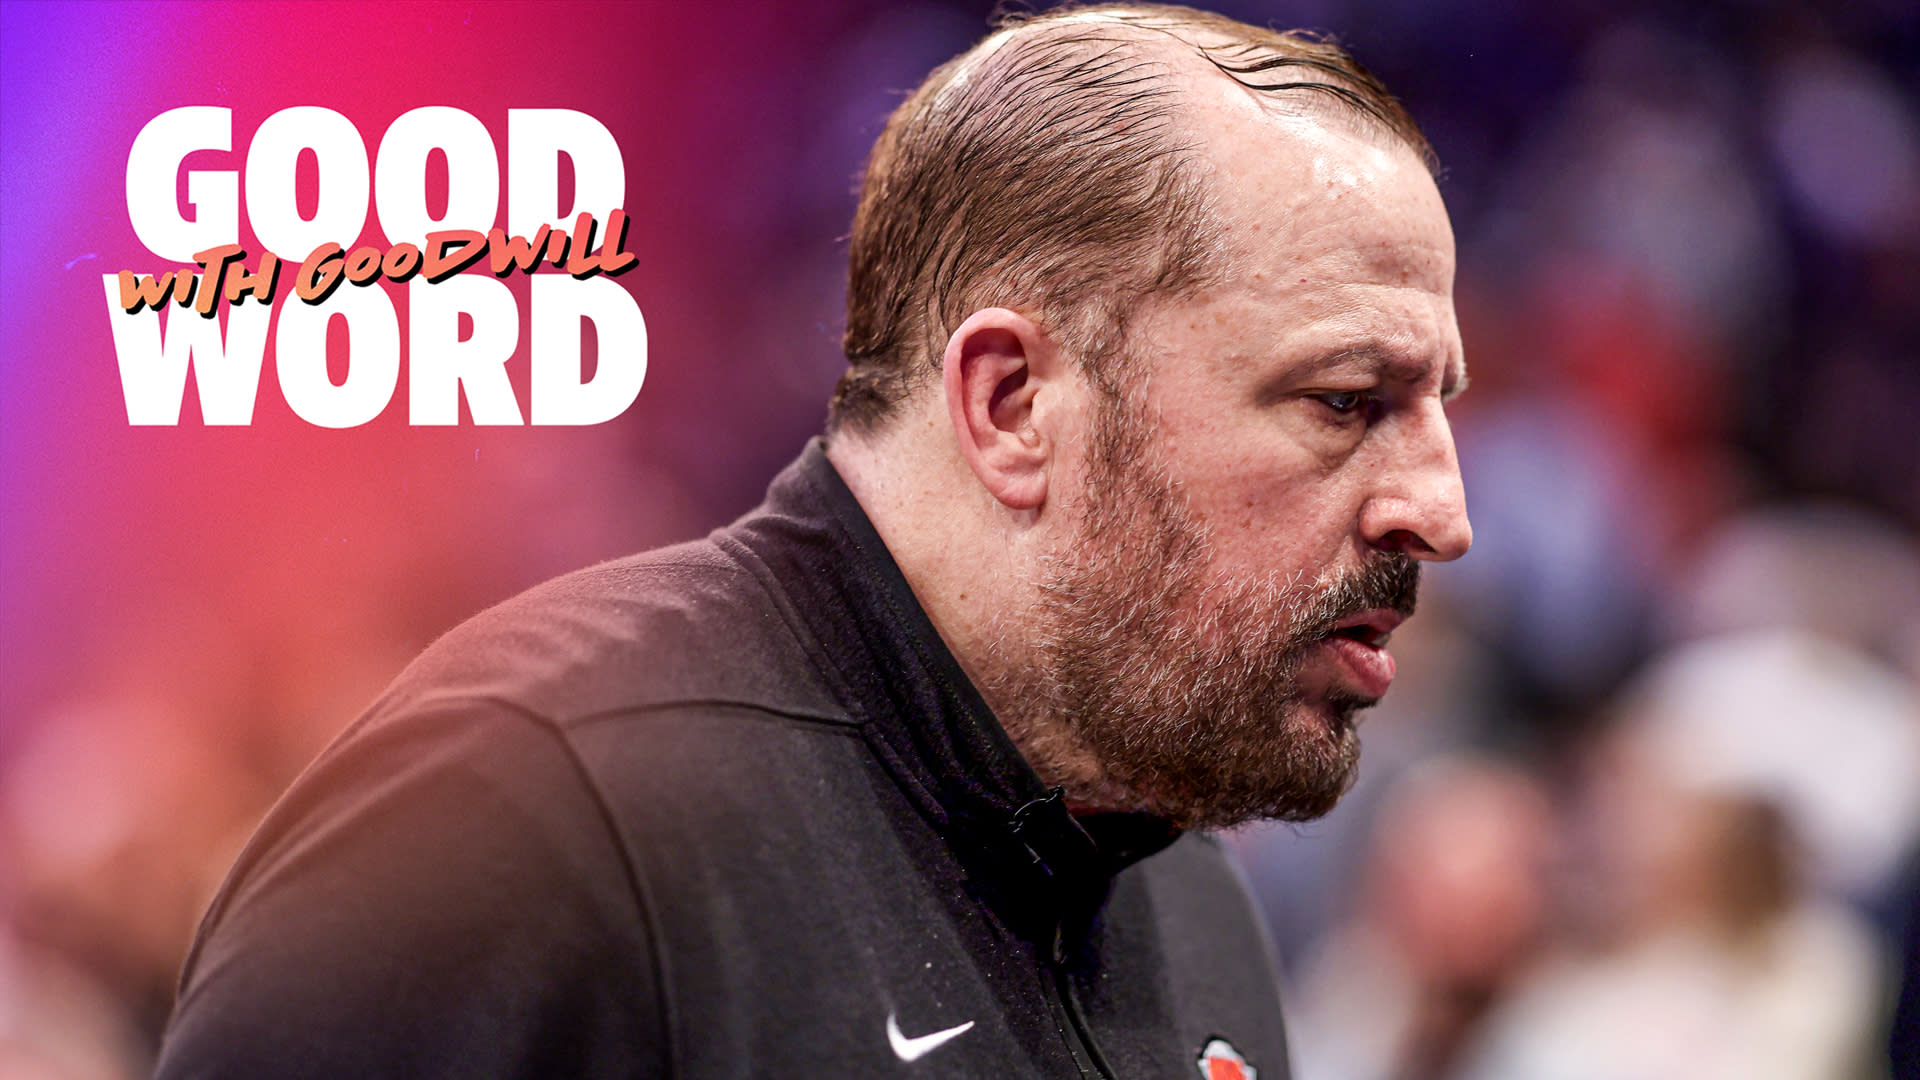 Knicks knocked from playoffs, is Tom Thibodeau to blame? | Good Word with Goodwill